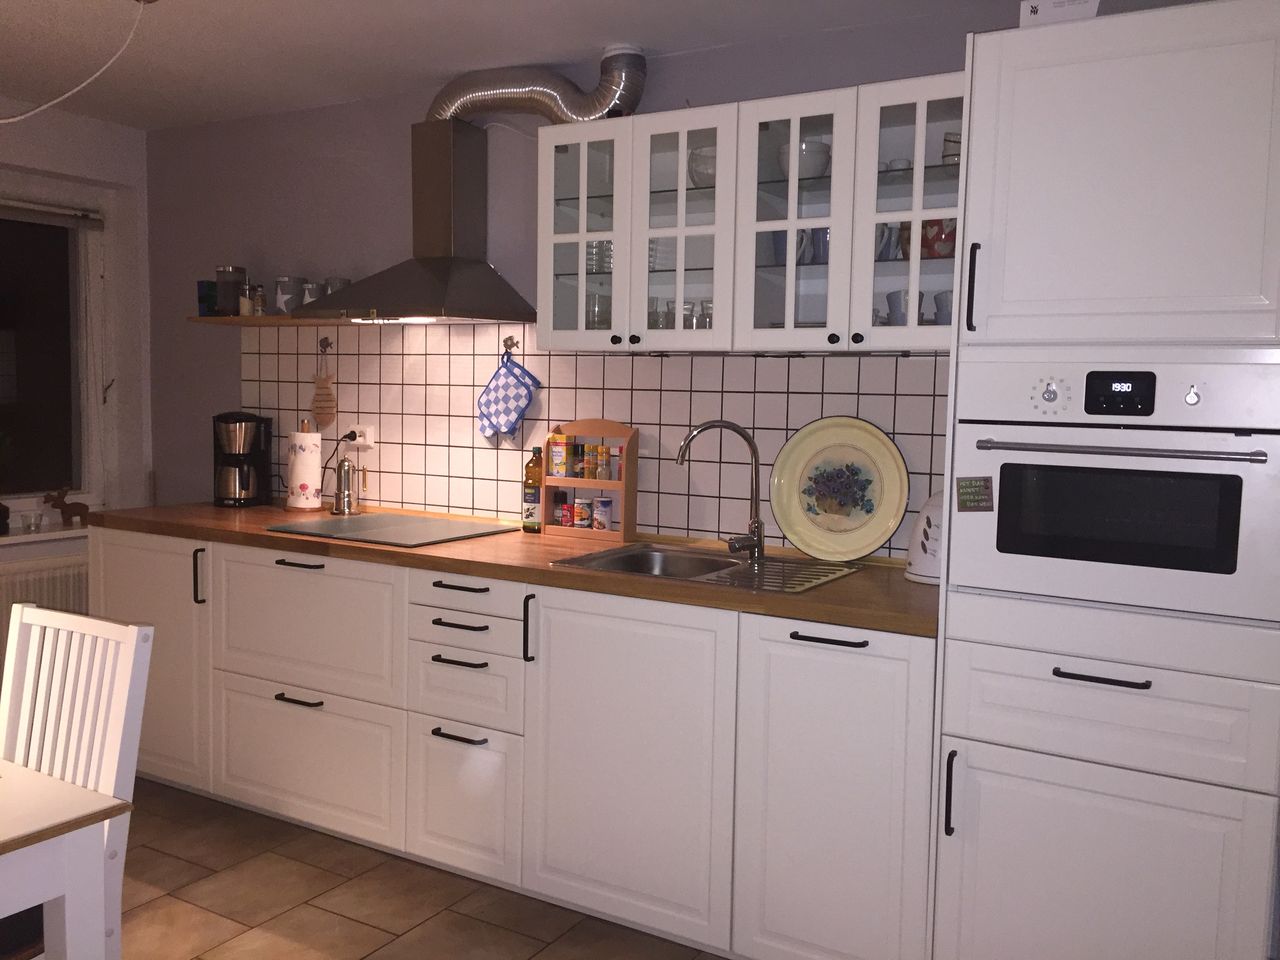 3-room-maisonette-appartement in Schleußig: green, quiet and yet in the middle of the city